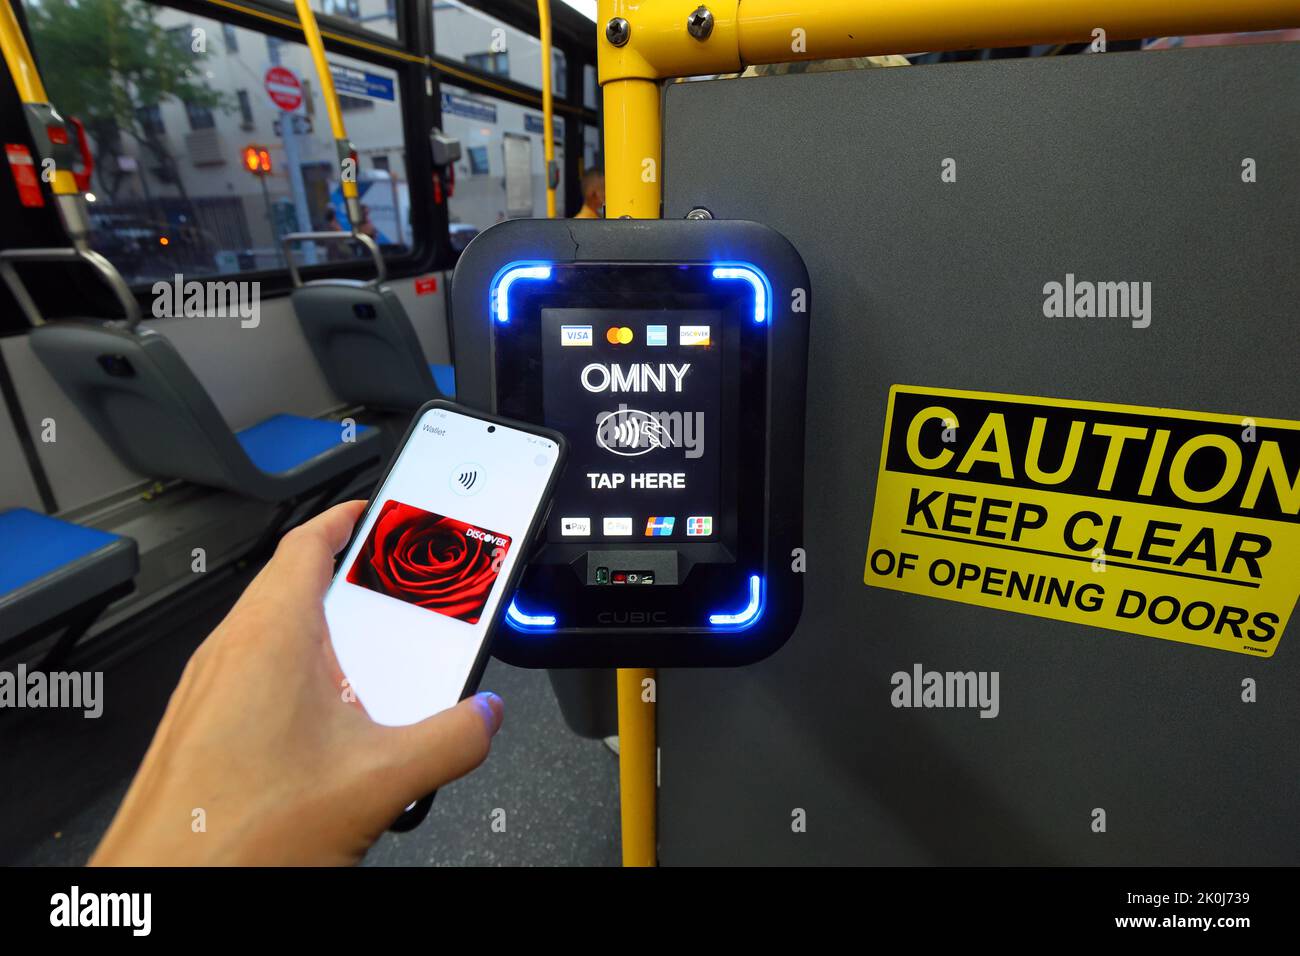 An NFC enabled smartphone with Google Wallet taps a OMNY contactless payment reader on a NYC Transit bus. Stock Photo